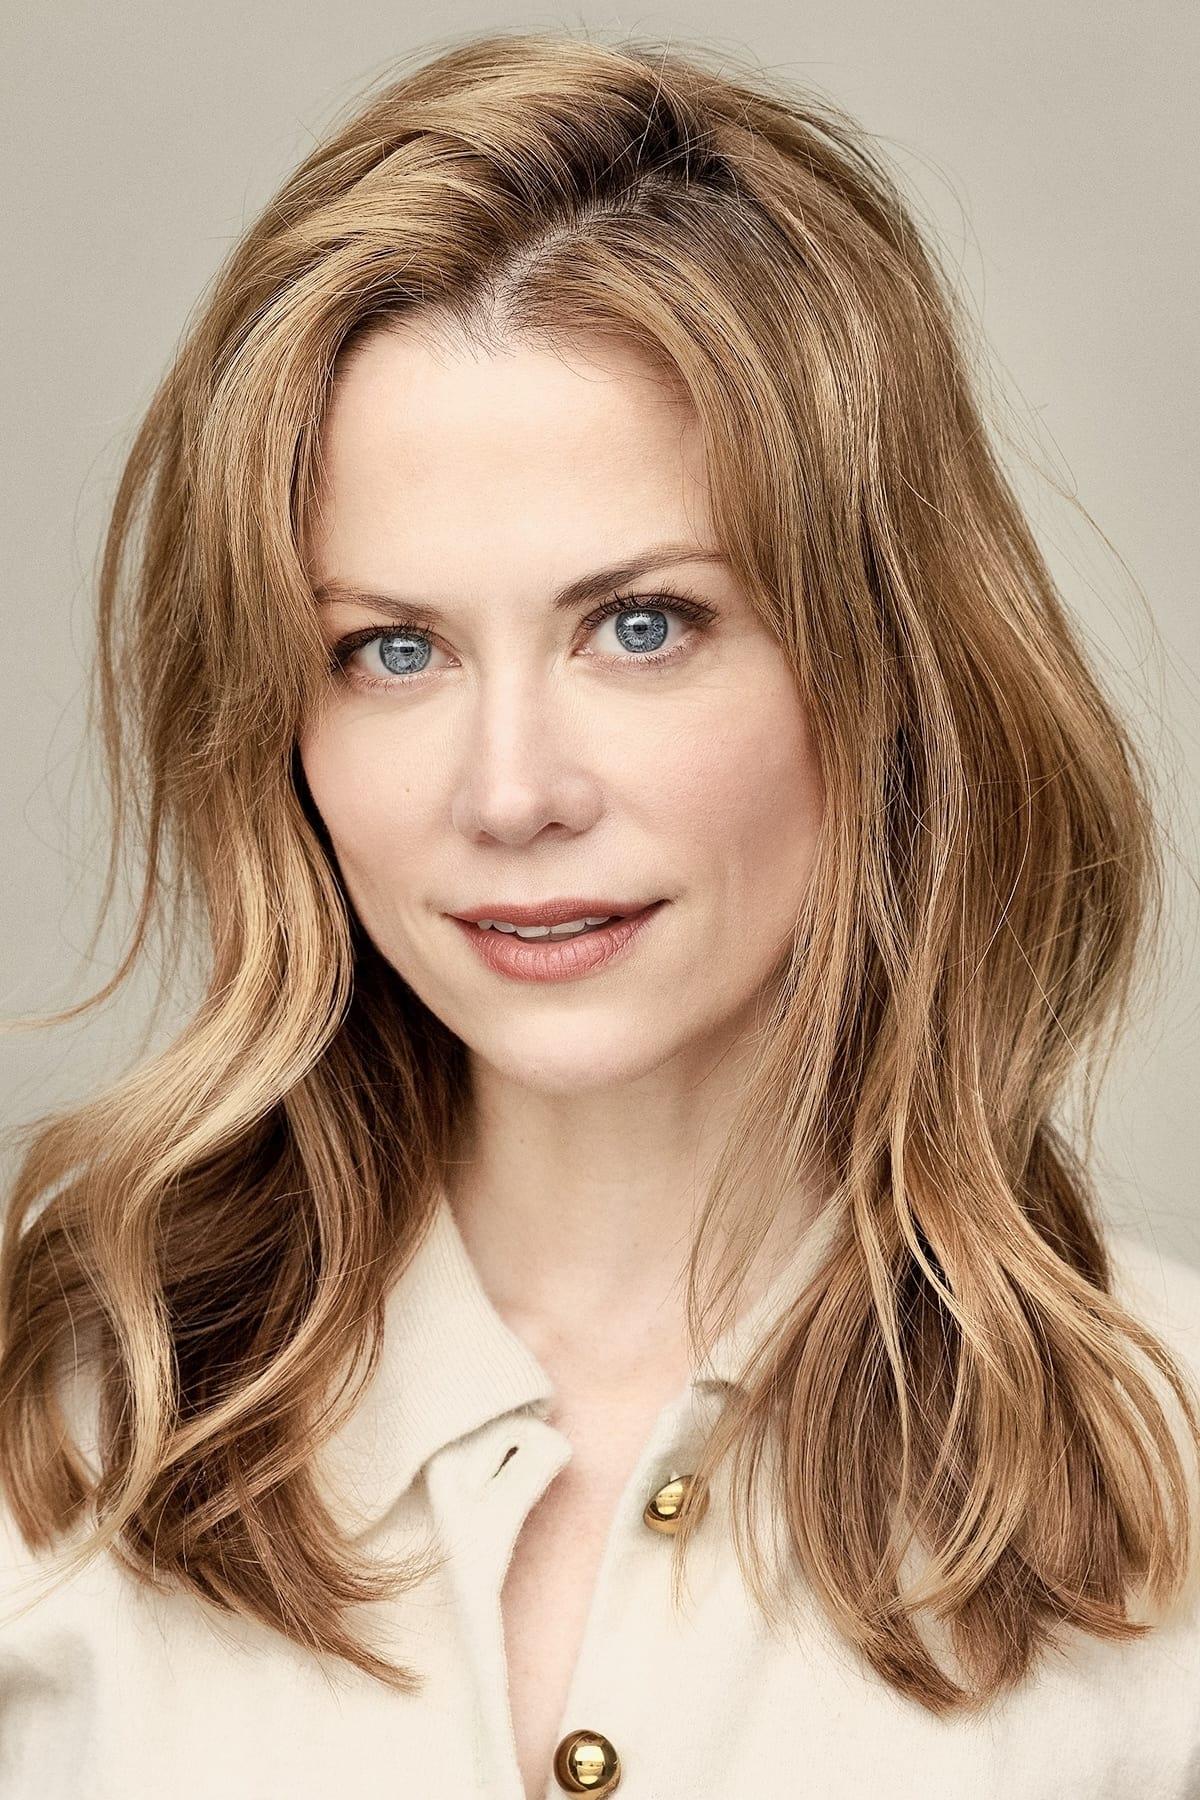 Claire Coffee poster